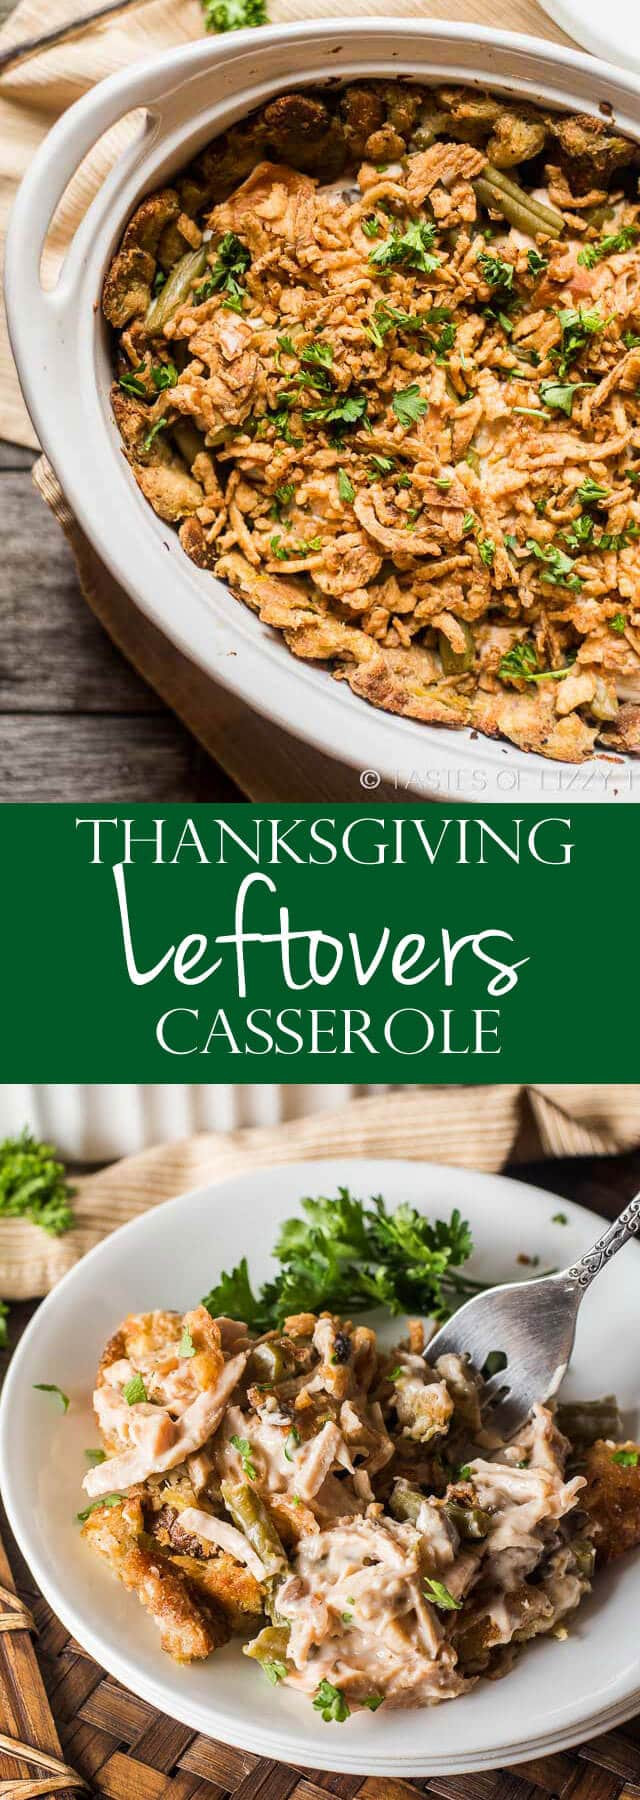 Thanksgiving Leftovers Casserole
 Turkey and Stuffing Casserole Recipe using Thanksgiving